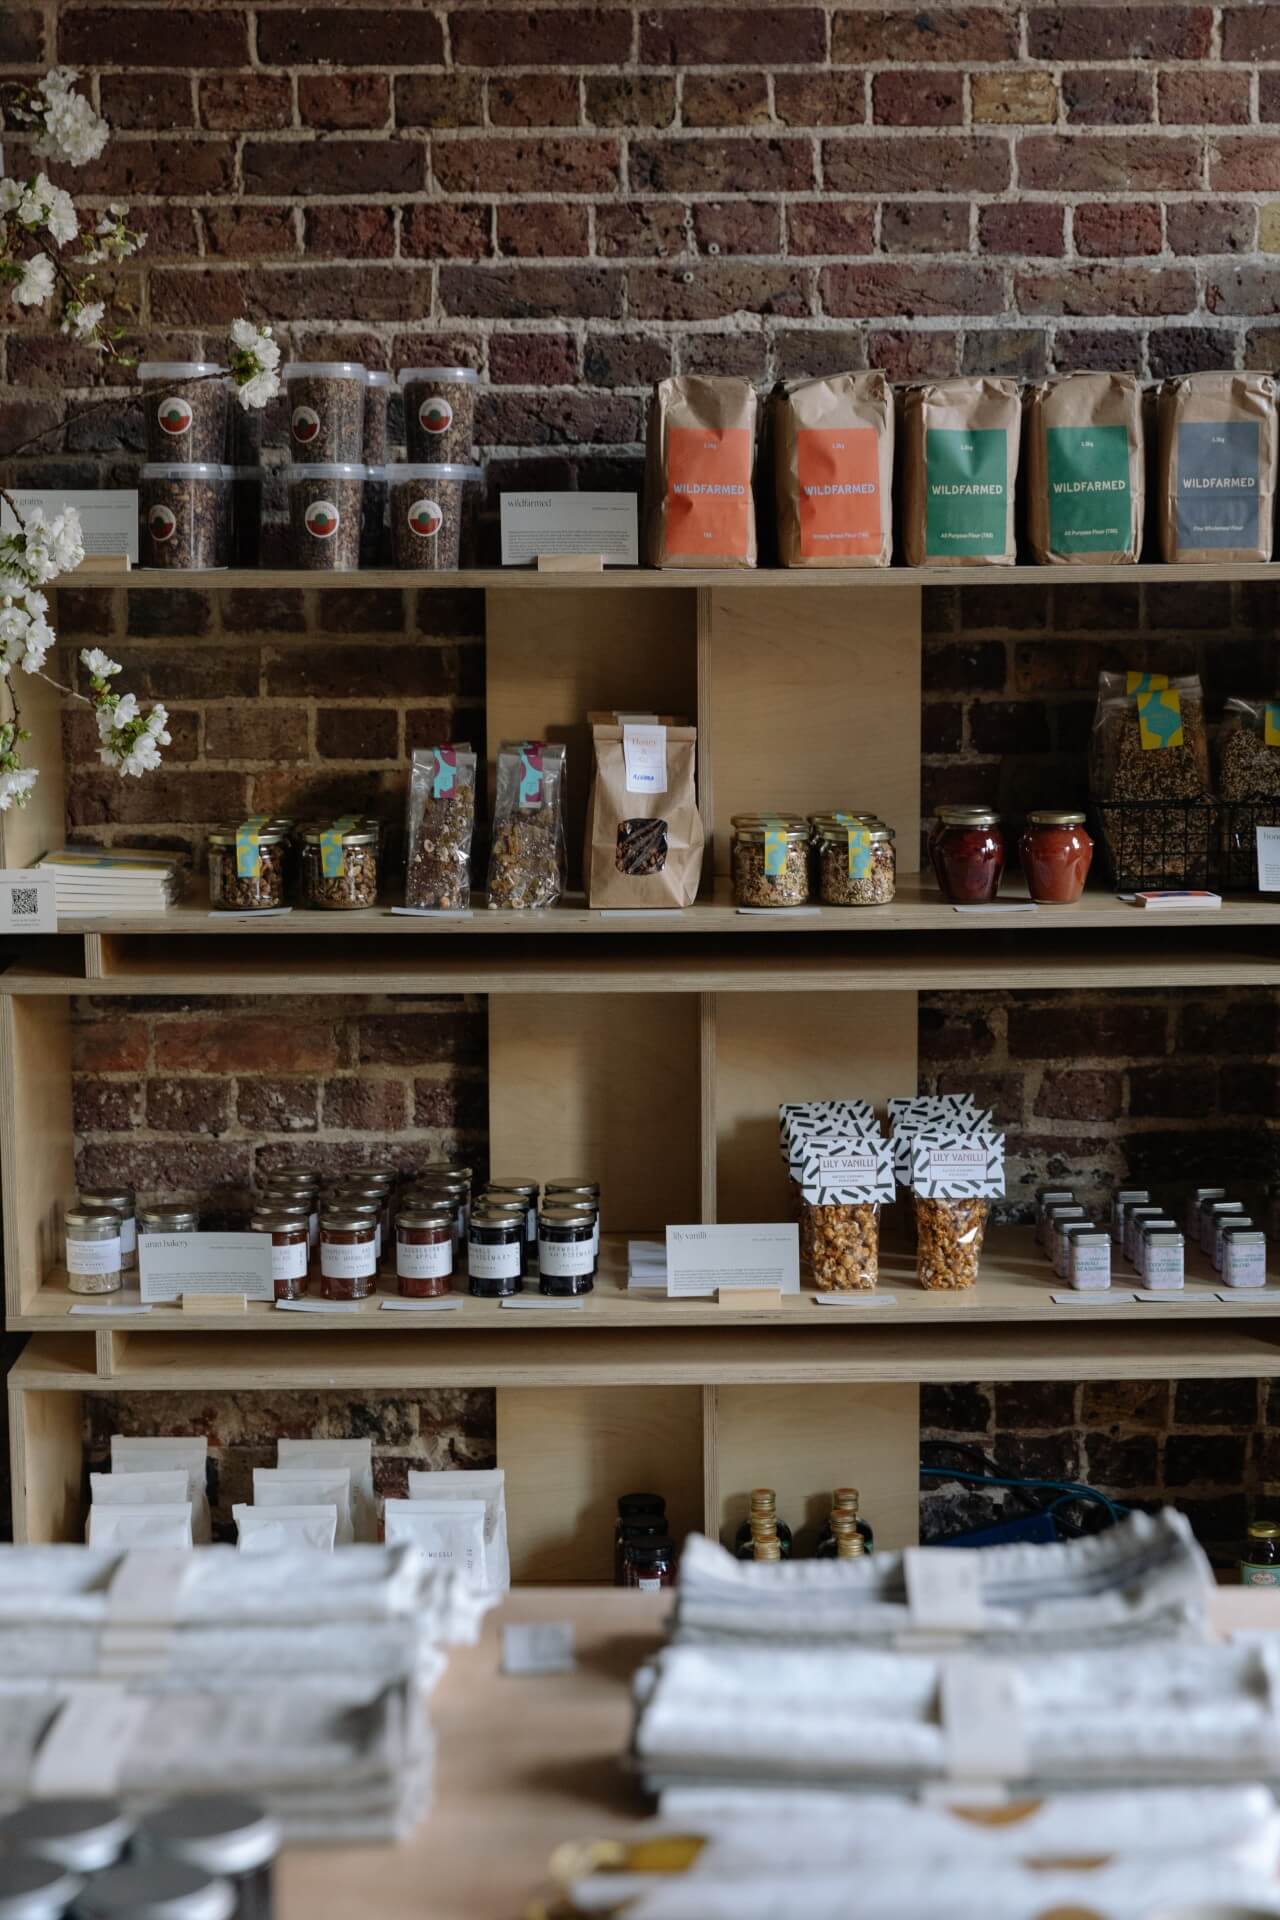 Independent Another Pantry food pop up shop in London with light wooden shelves and exposed brickwork